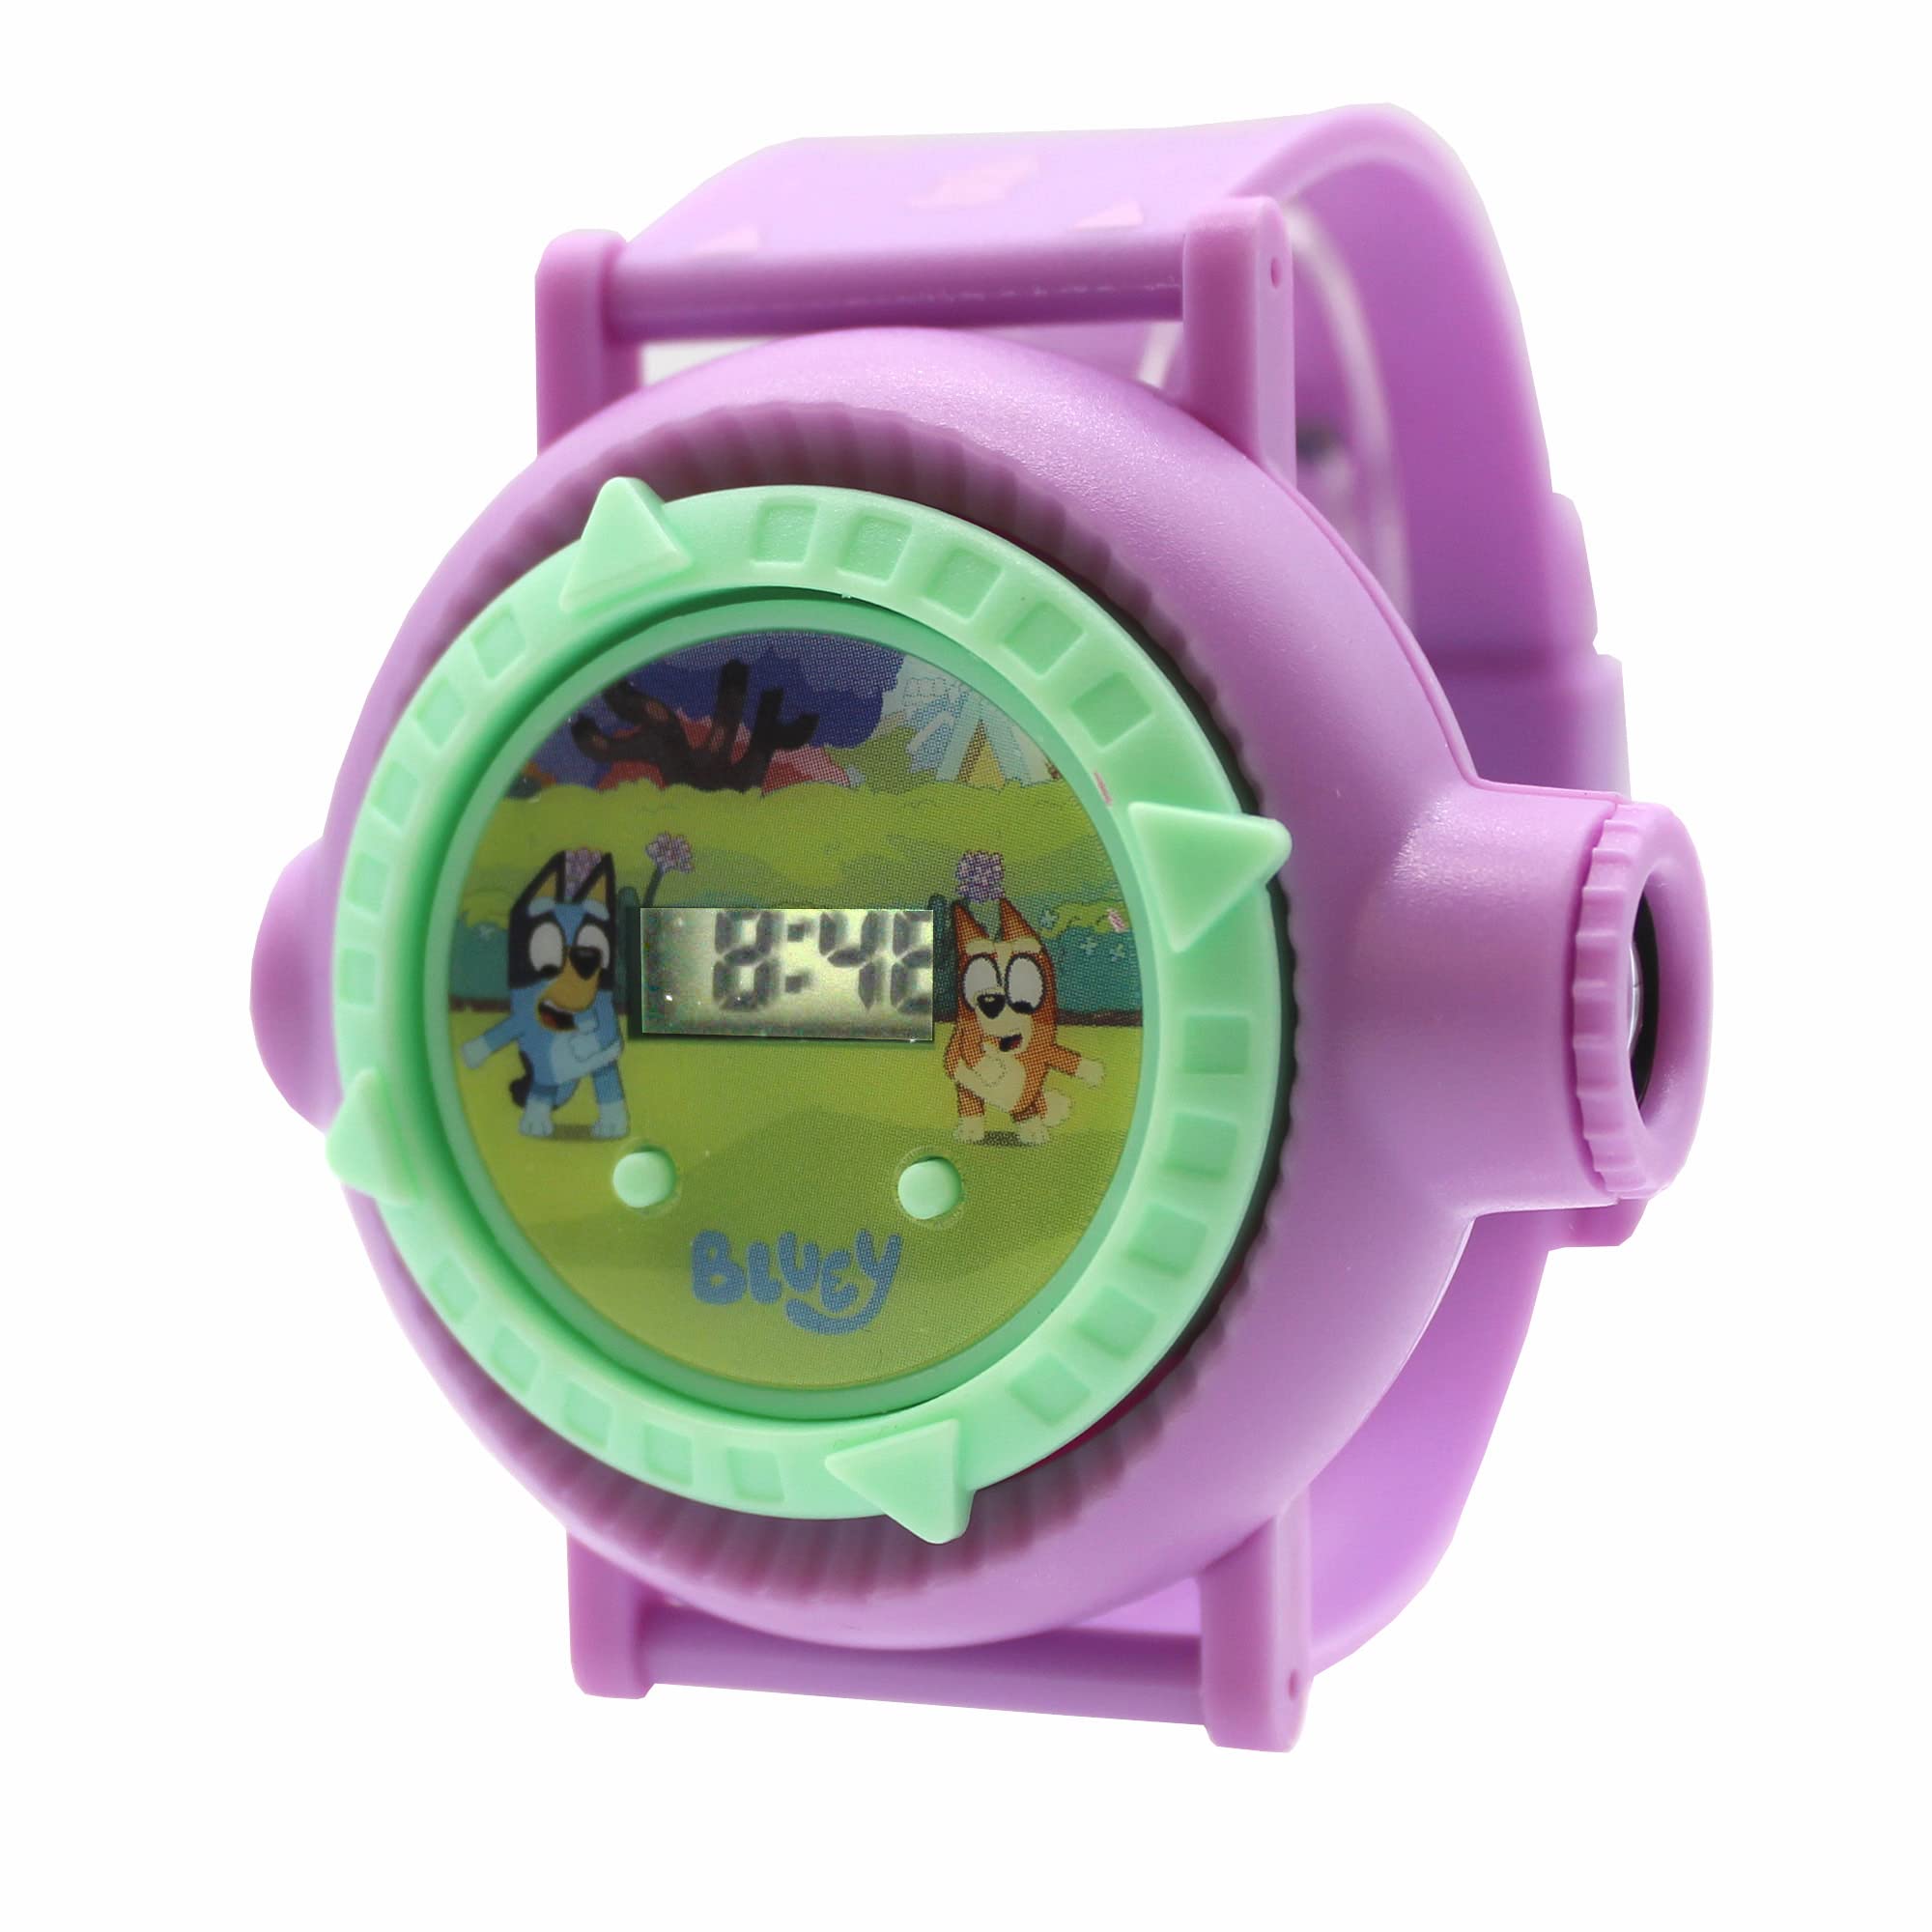 Accutime Kids Bluey Digital LCD Projection Quartz Wrist Watch with 10 Pictures, Purple Strap for Girls, Boys, Kids 3+ Years (Model: BLY4013AZ)